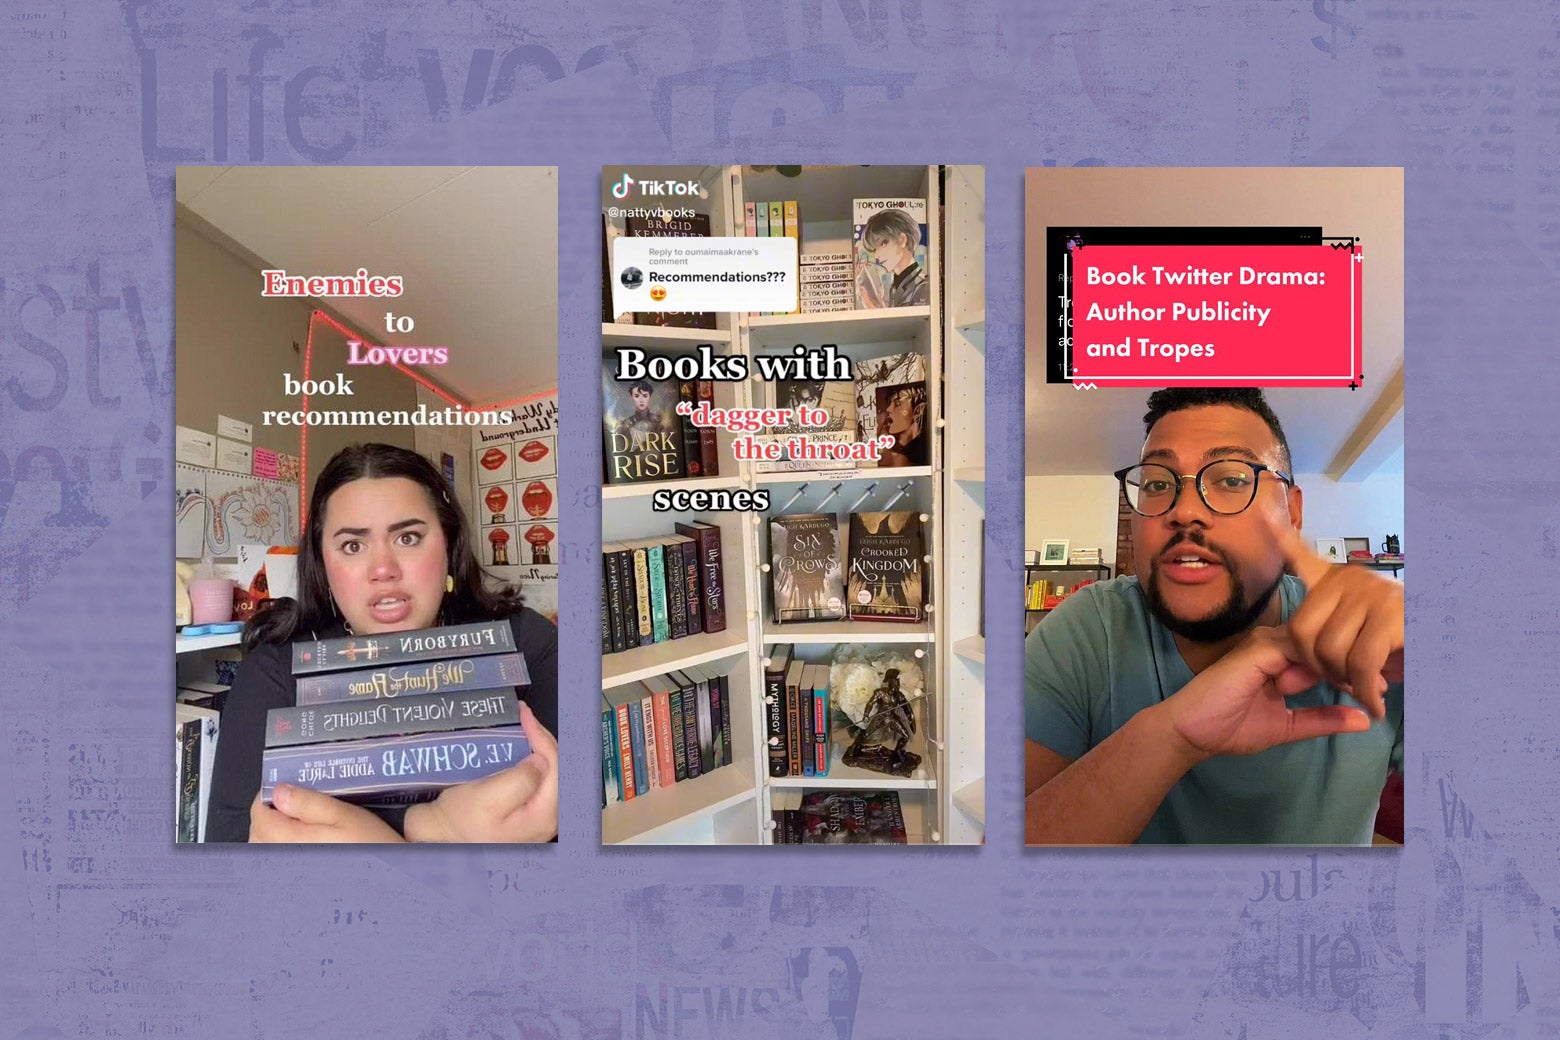 Screenshots of three BookTok accounts describing various tropes, including "enemies to lovers" plots and "dagger to the throat" scenes, as well as a bookfluencer explaining Book Twitter drama around publicity and tropes.